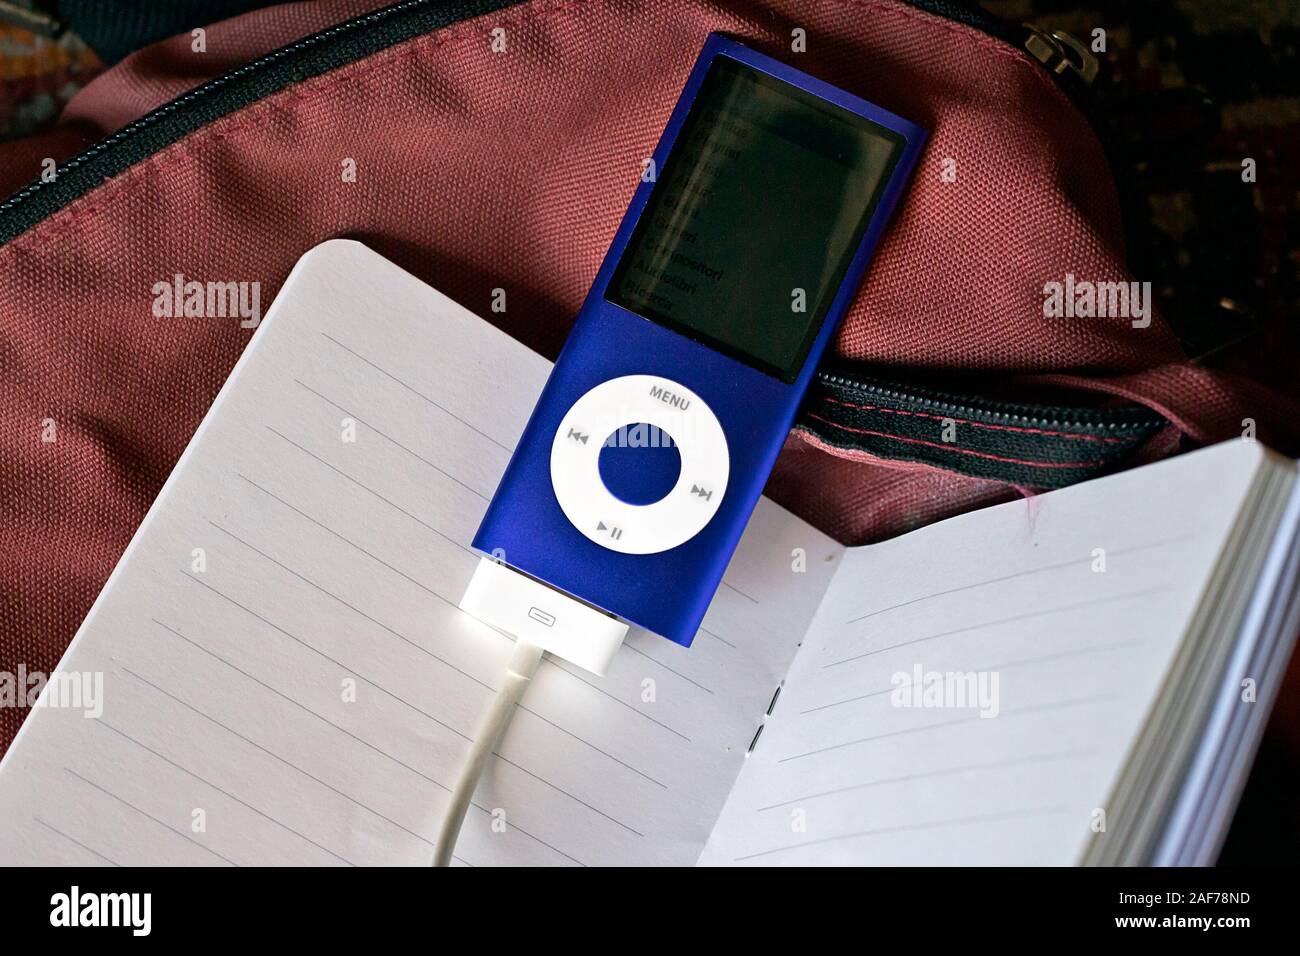 Milan, Italy - June 4, 2019.Apple iPod Nano 8Gb, blue  Music Player with charger cable attached on notebook and schoolbag background Stock Photo